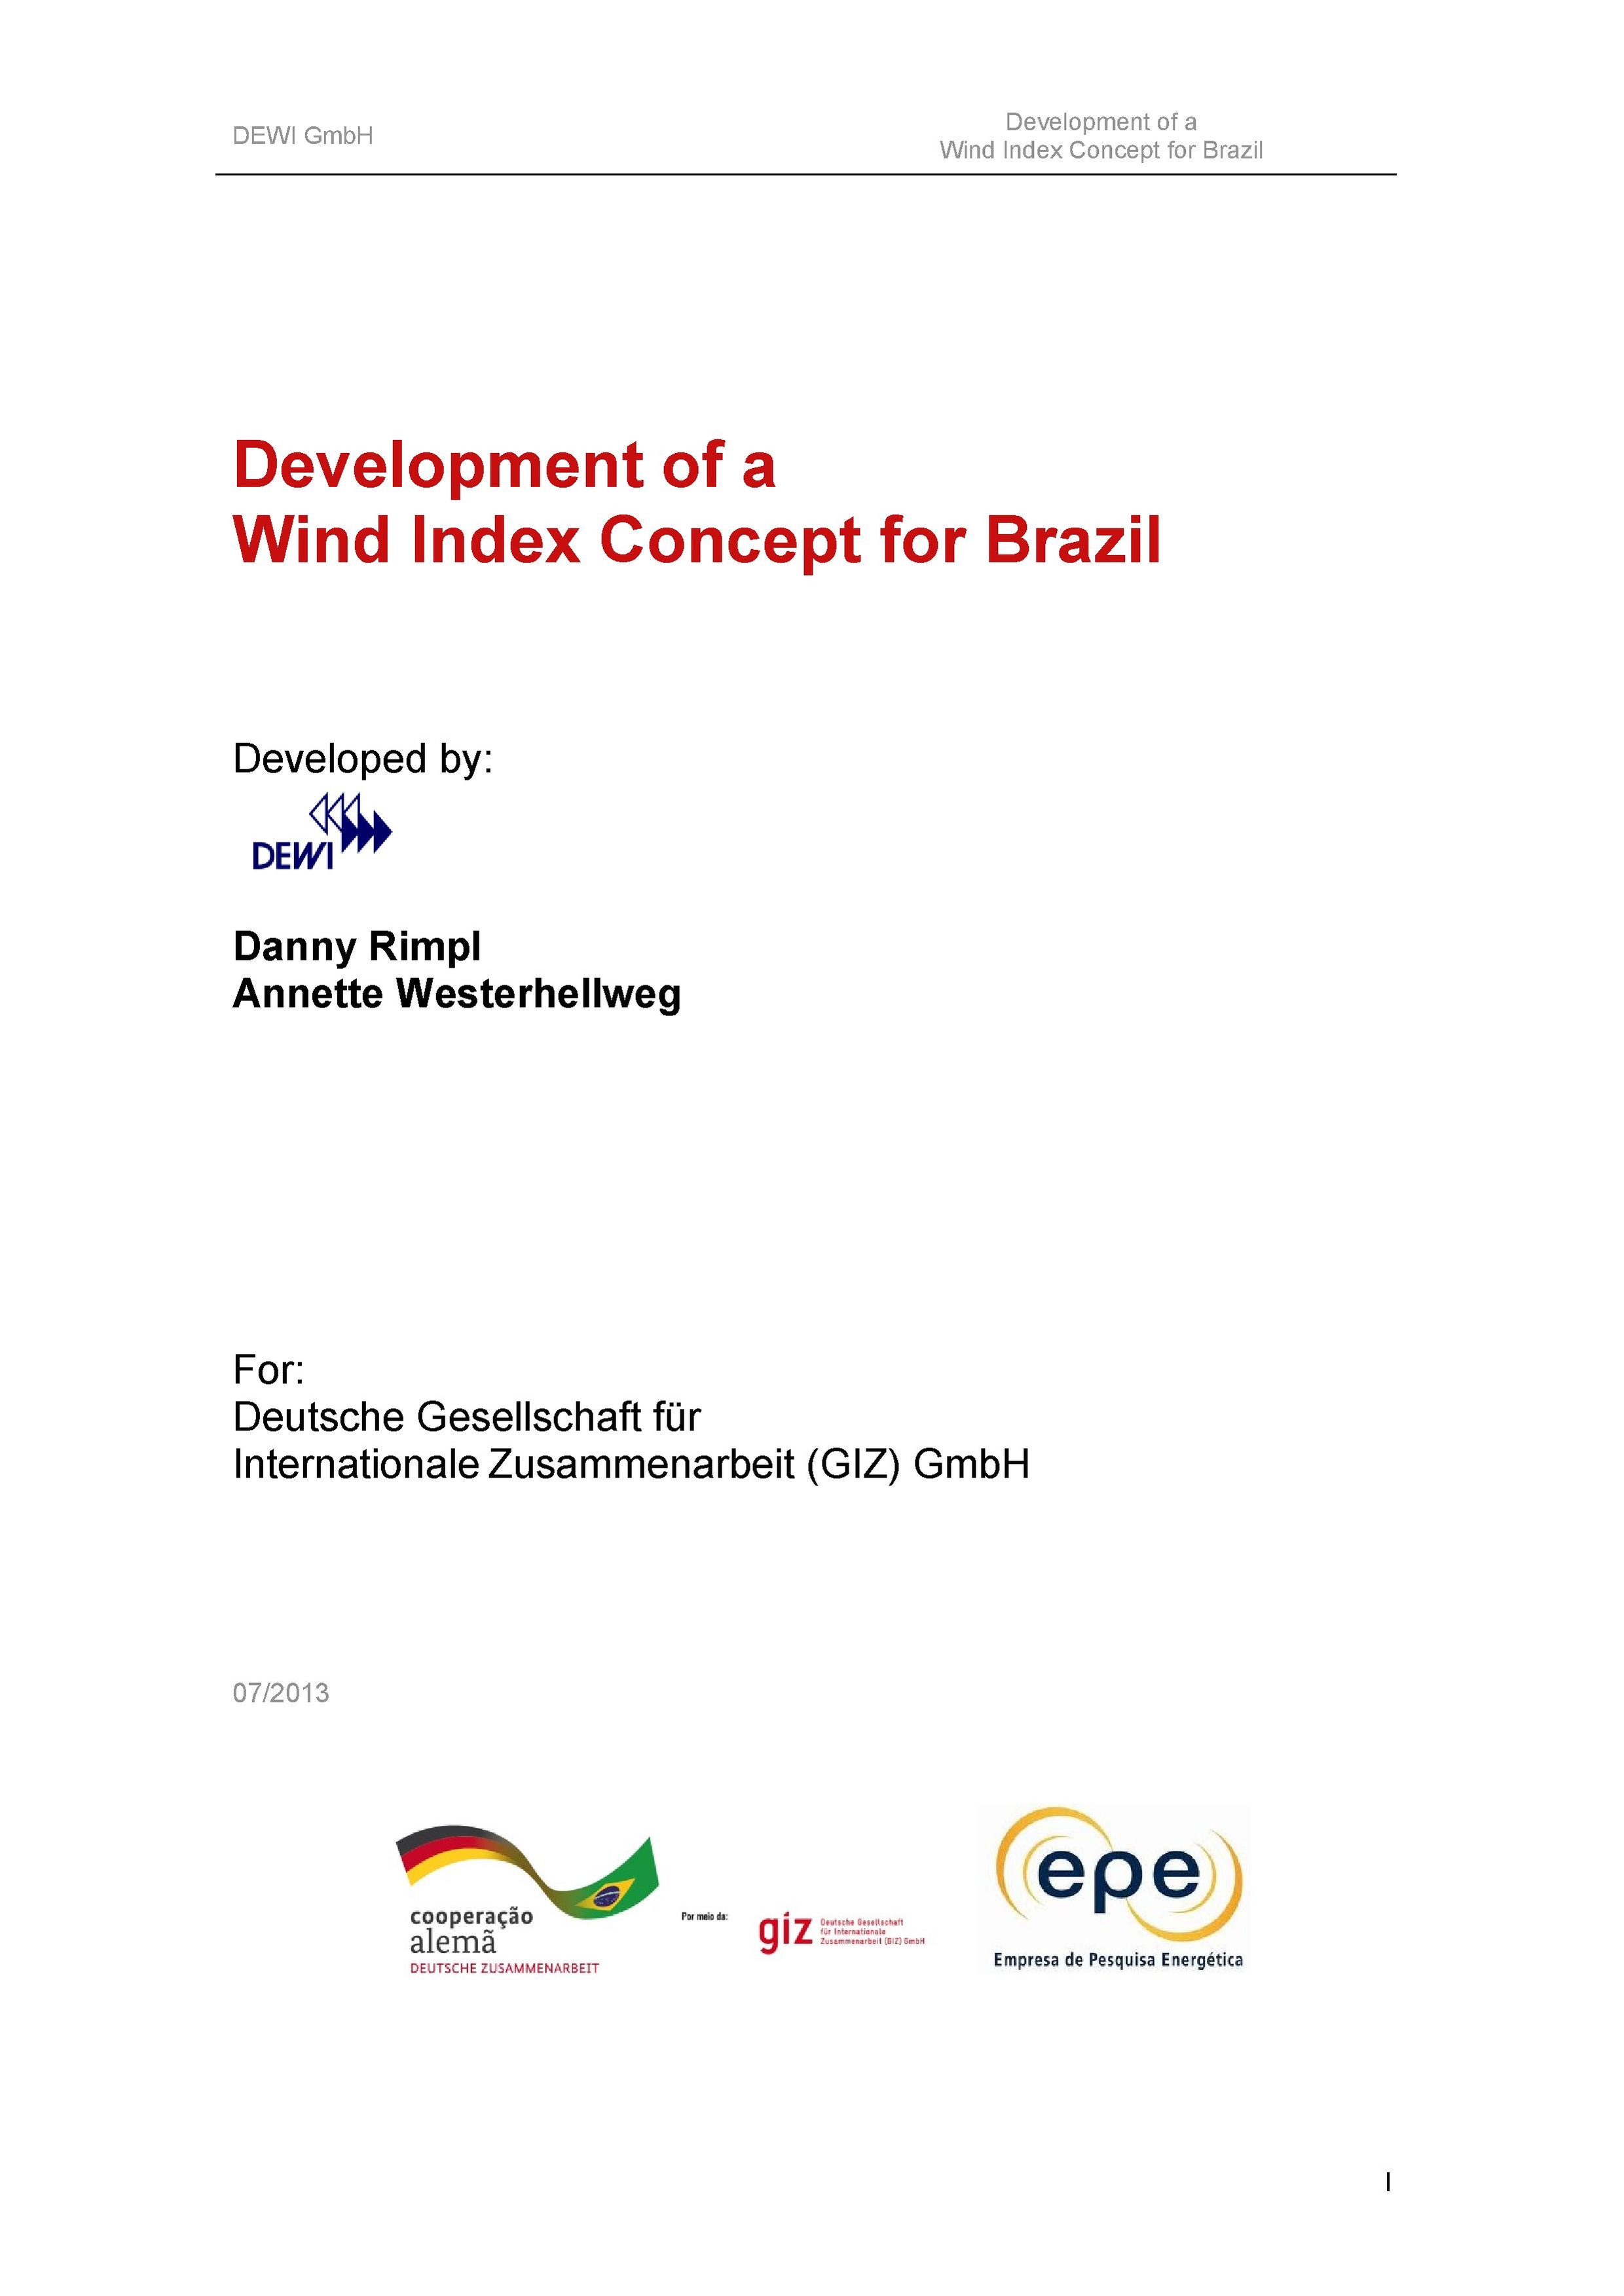 Development of a Wind Index Concept for Brazil